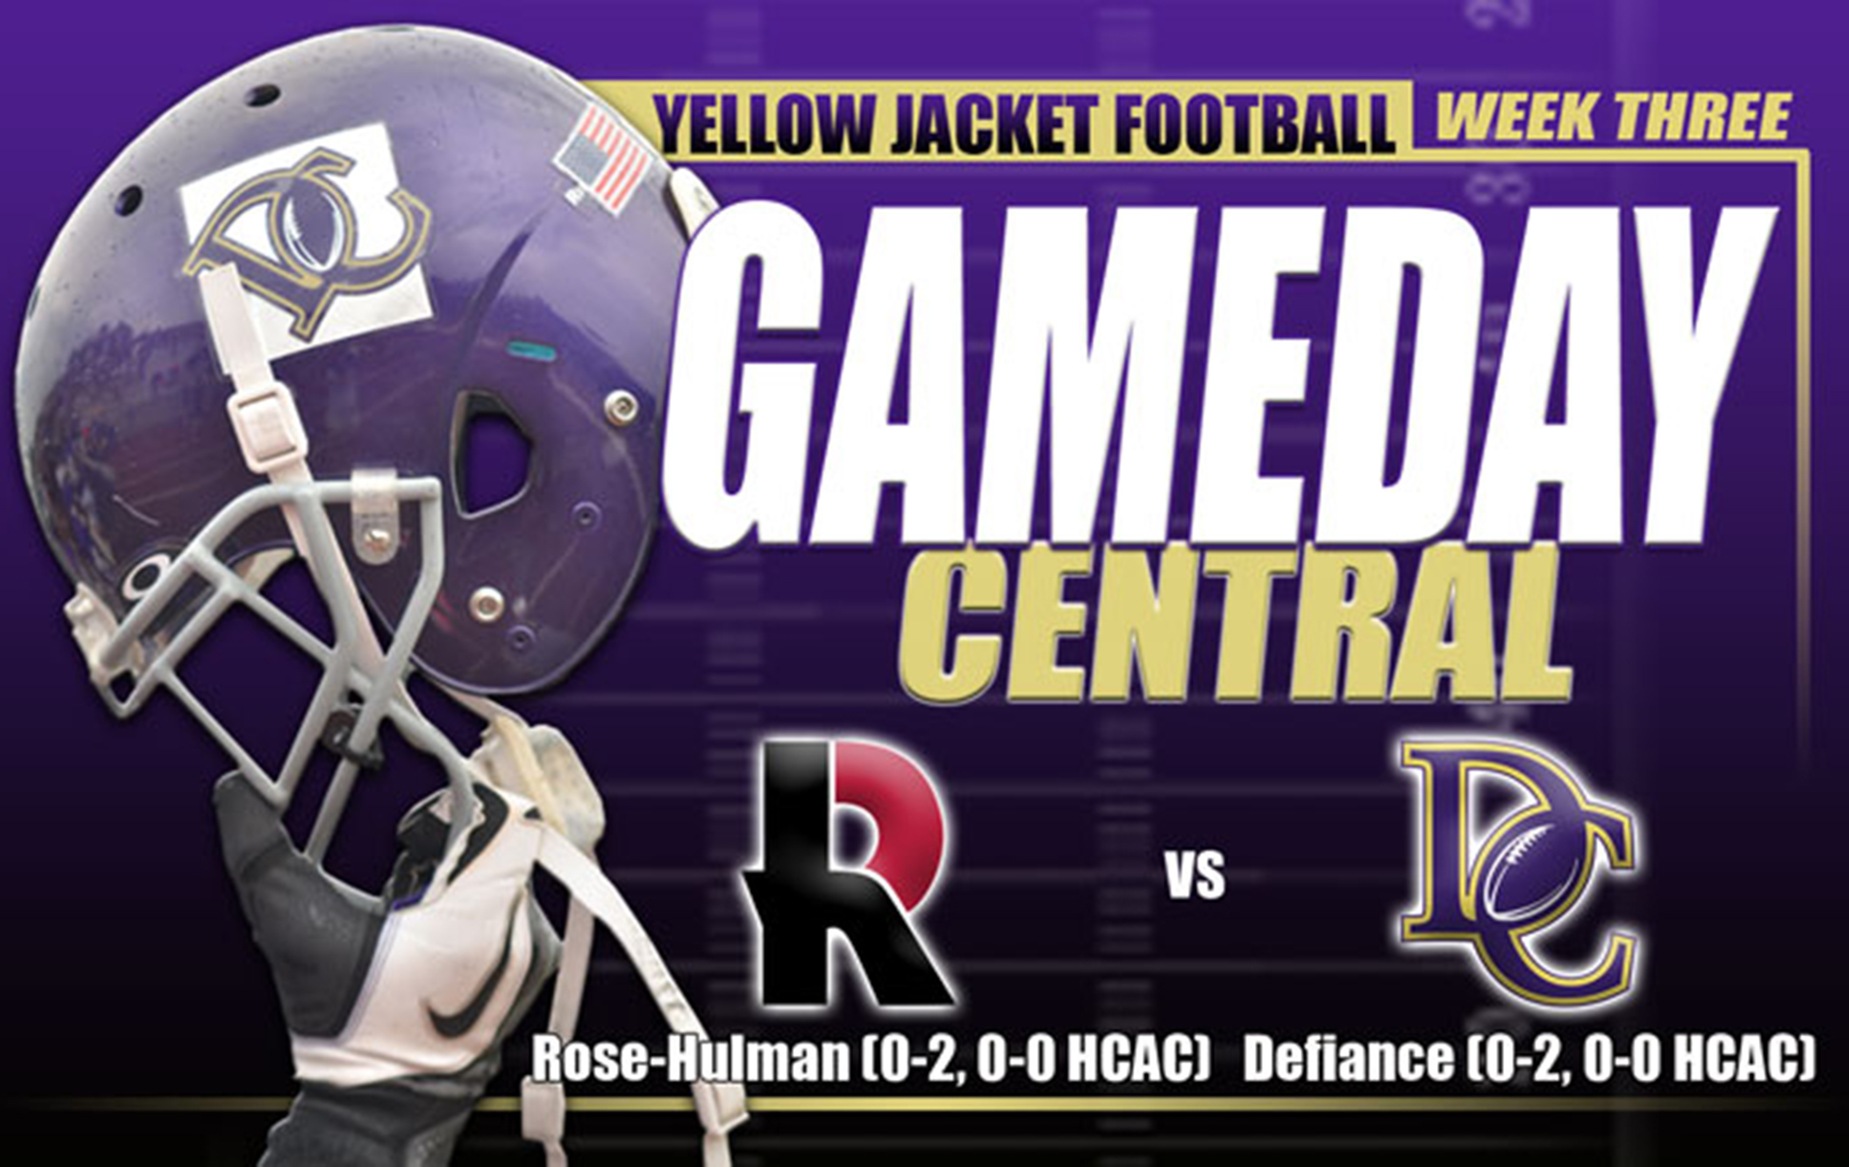 GAMEDAY CENTRAL - Defiance vs Rose-Hulman - Game Three